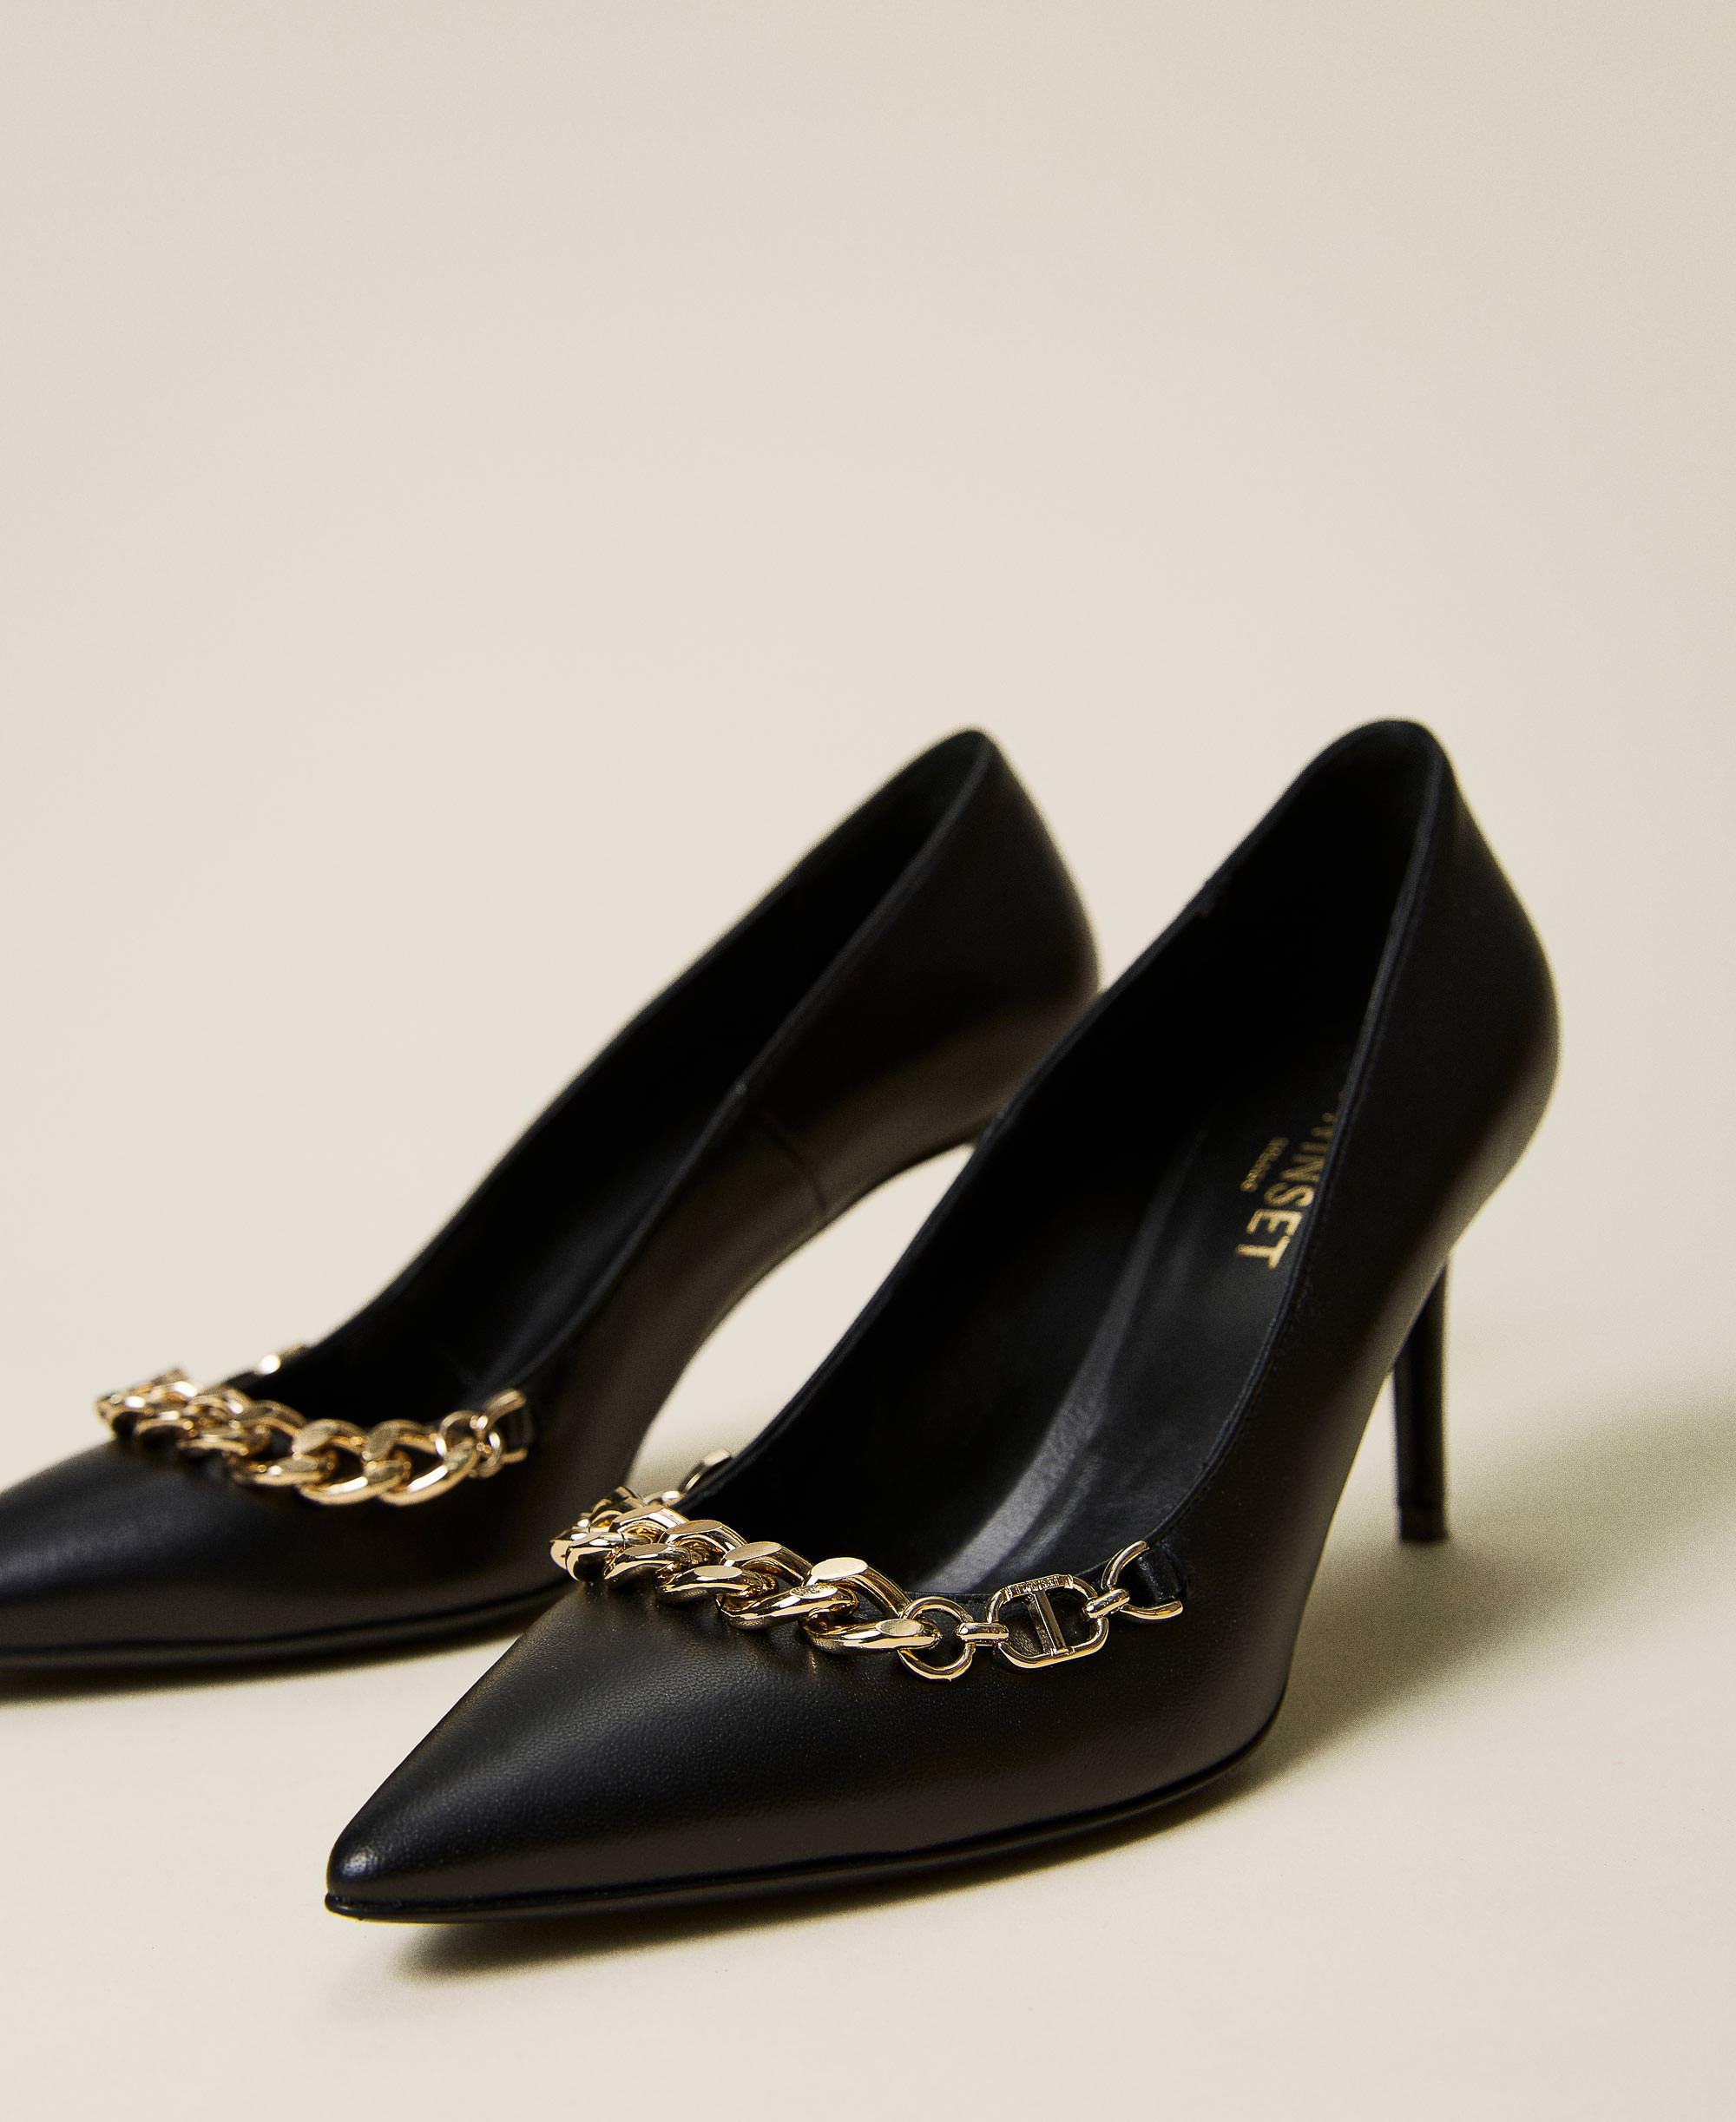 Leather court shoes with chain and logo